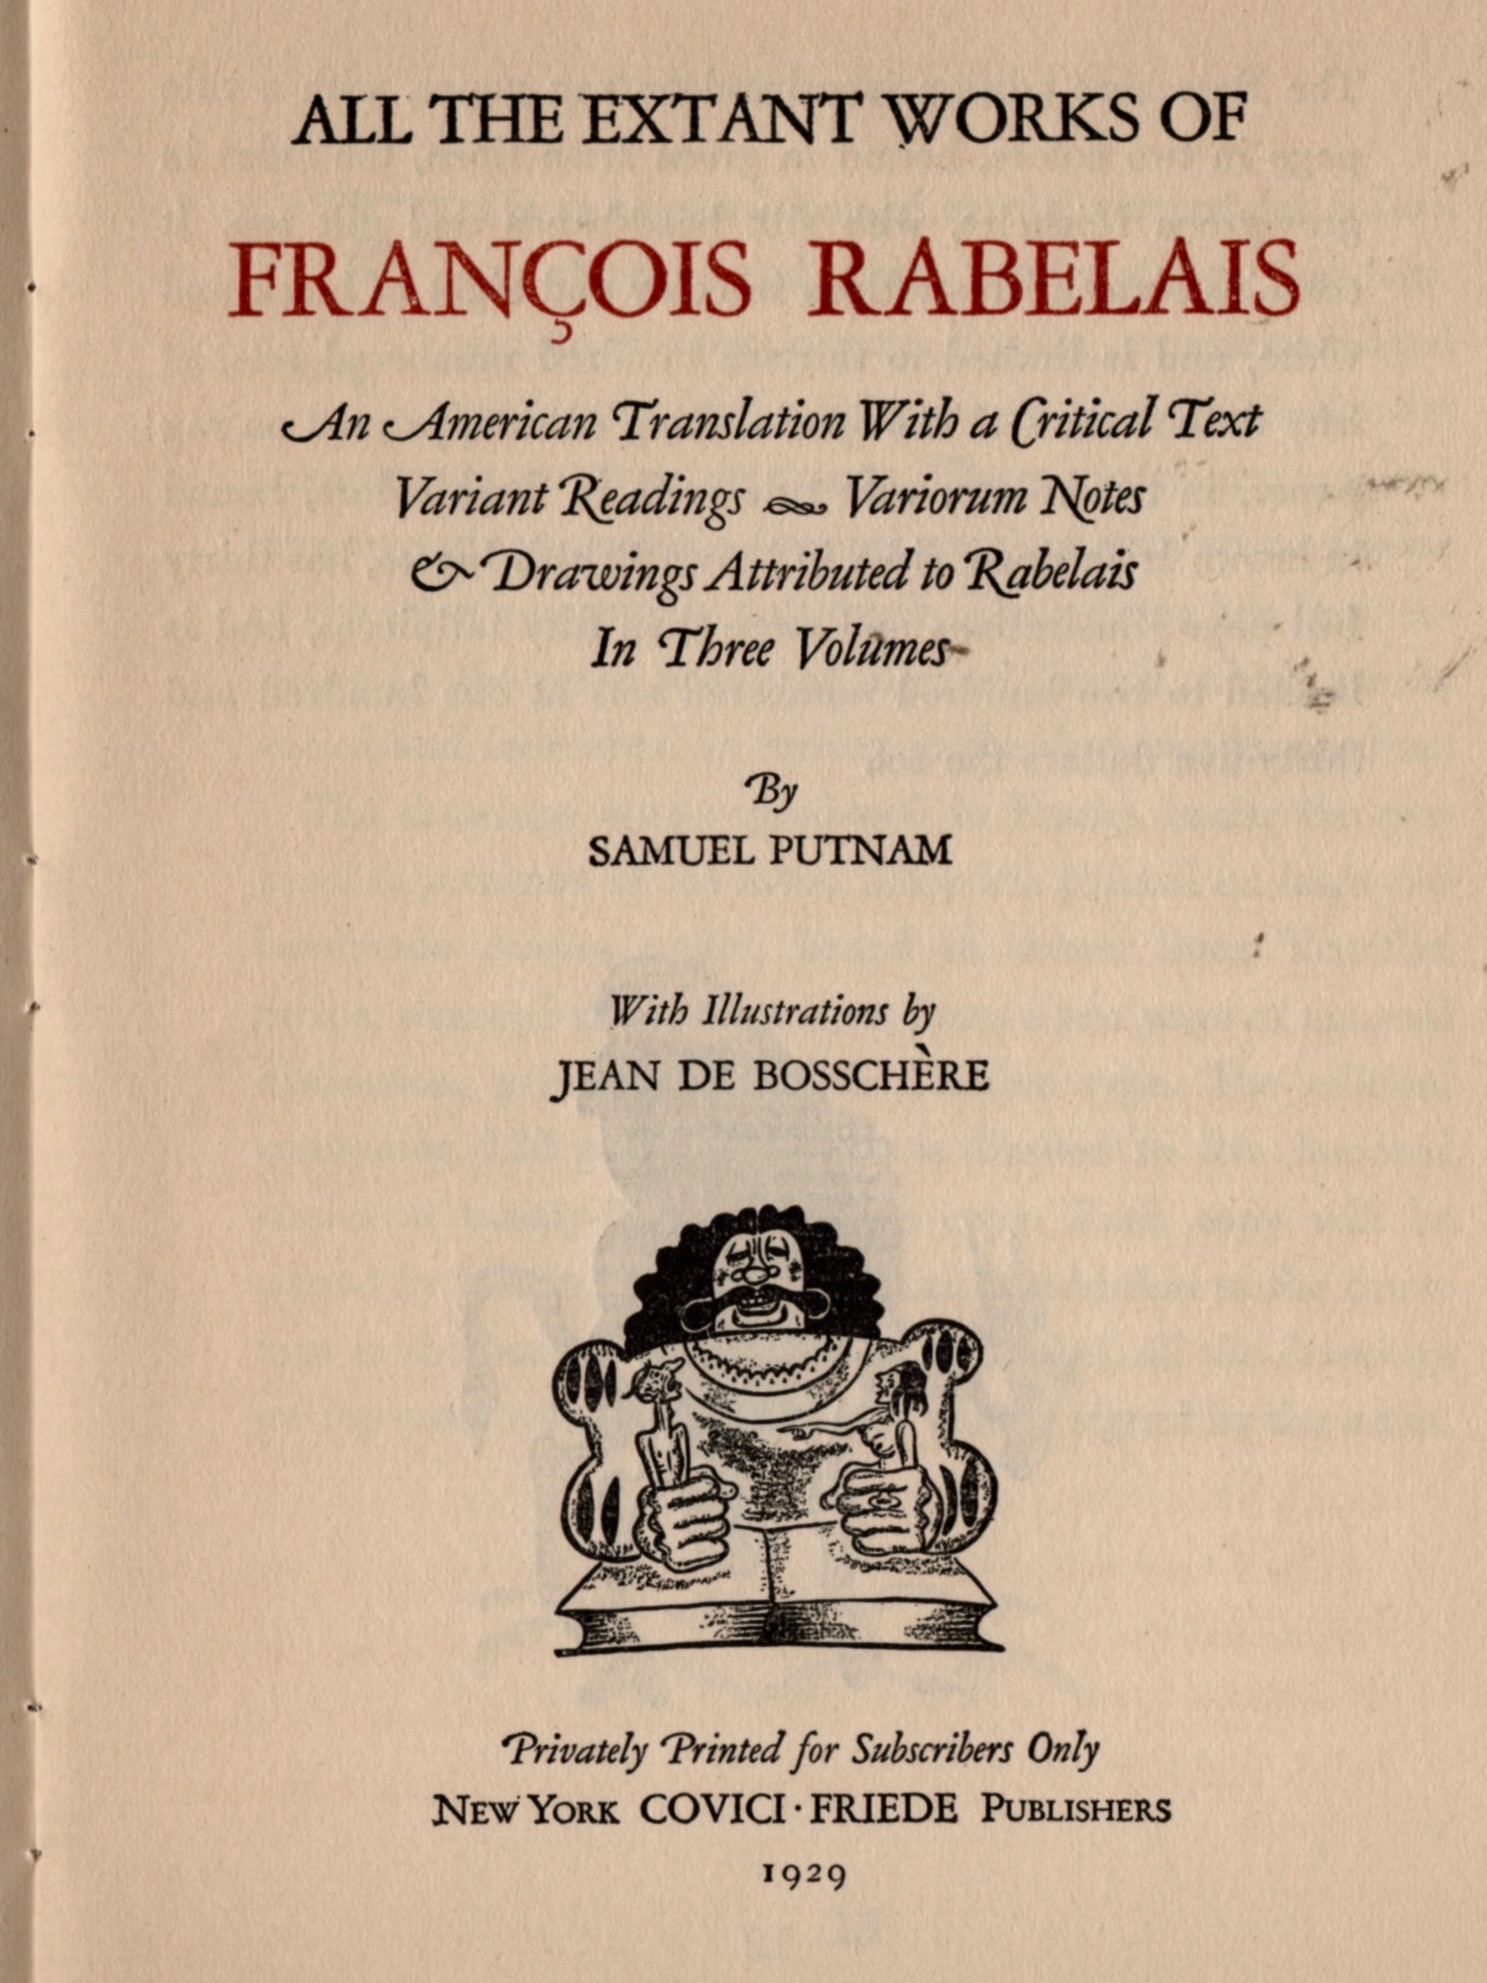  The handsome full-page reproduction of the Rabelais title page.  